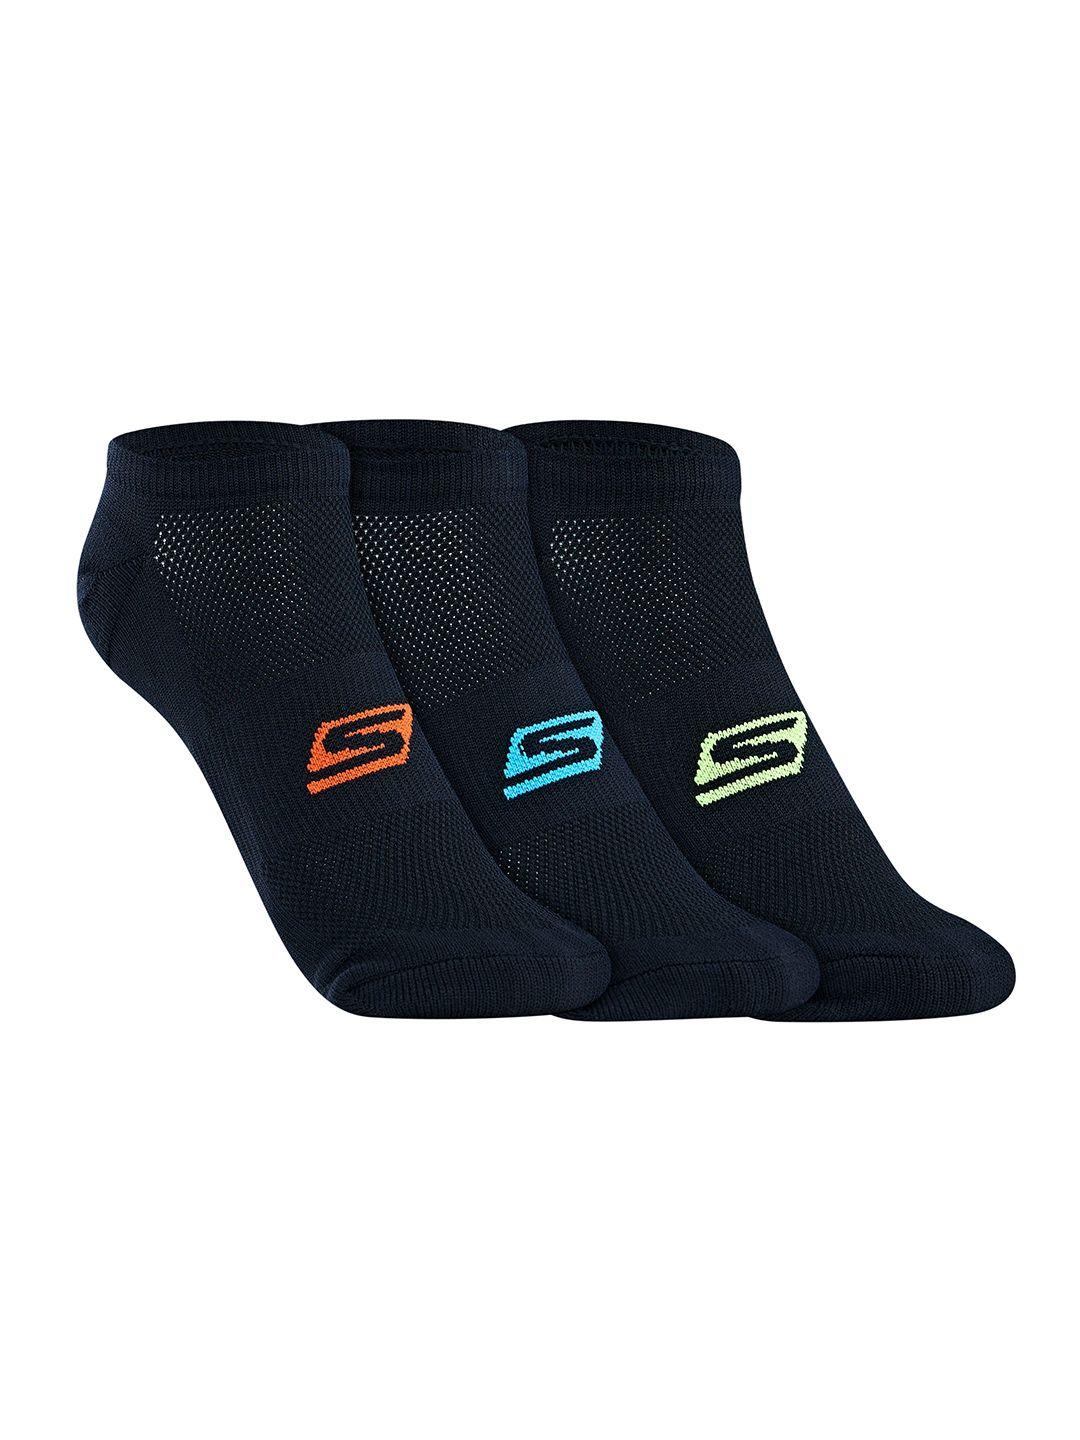 skechers-women-pack-of-3-patterned-non-terry-low-cut-ankle-length-socks